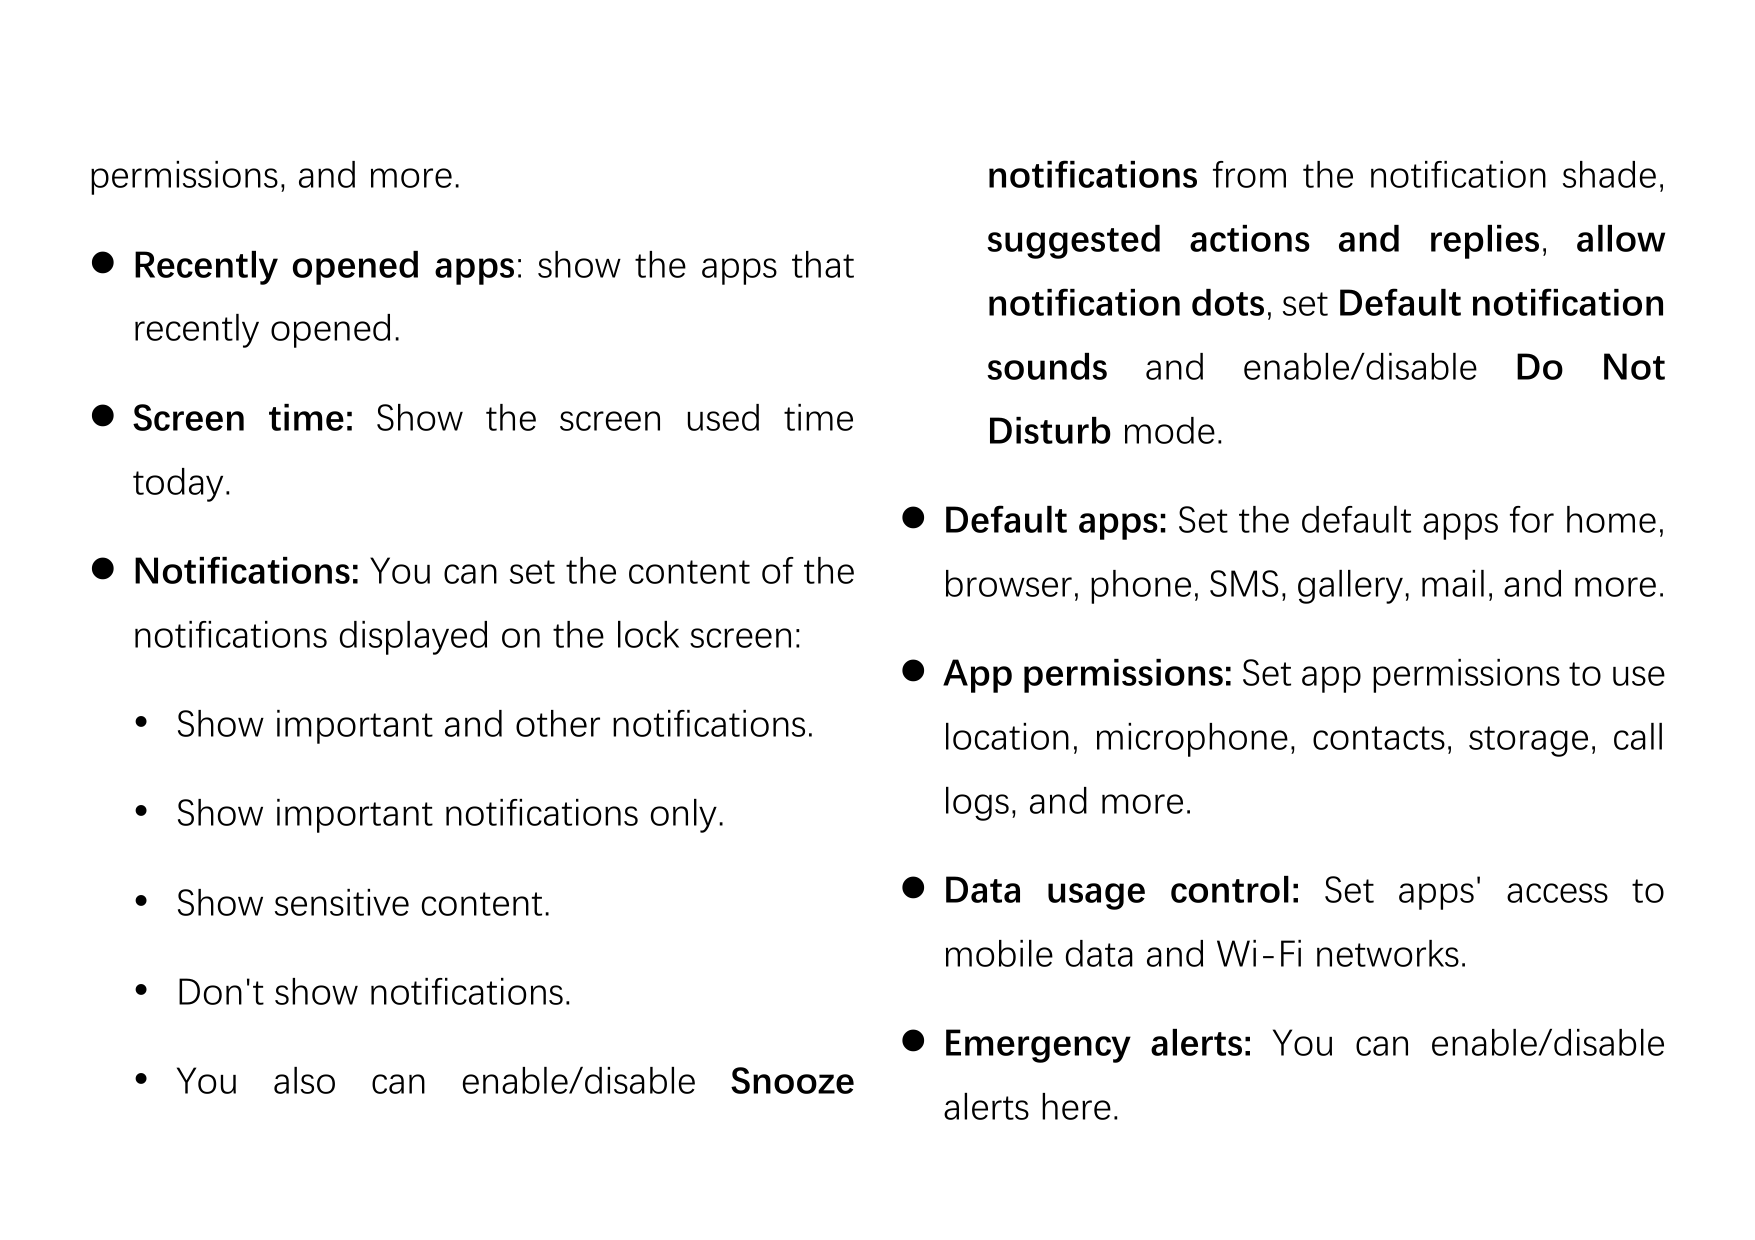 permissions, and more. Recently opened apps: show the apps thatrecently opened. Screen time: Show the screen used timetoday. 